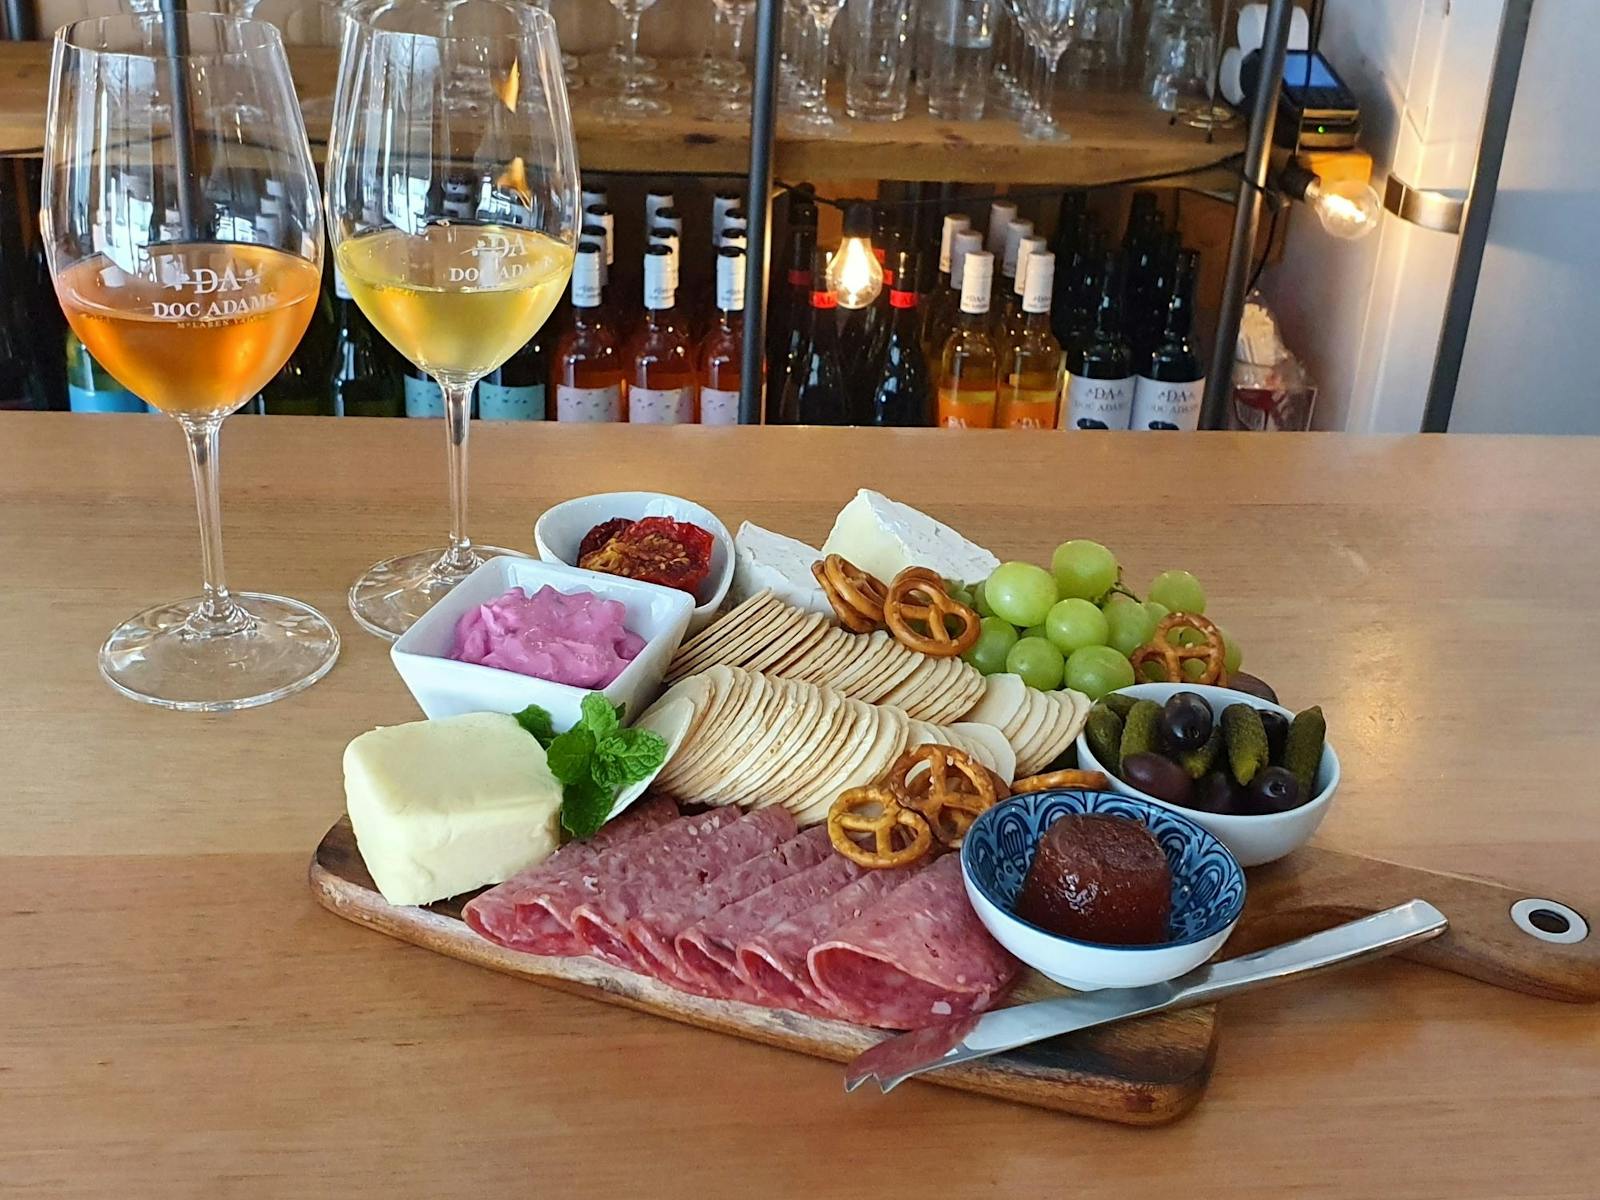 Platter with wine